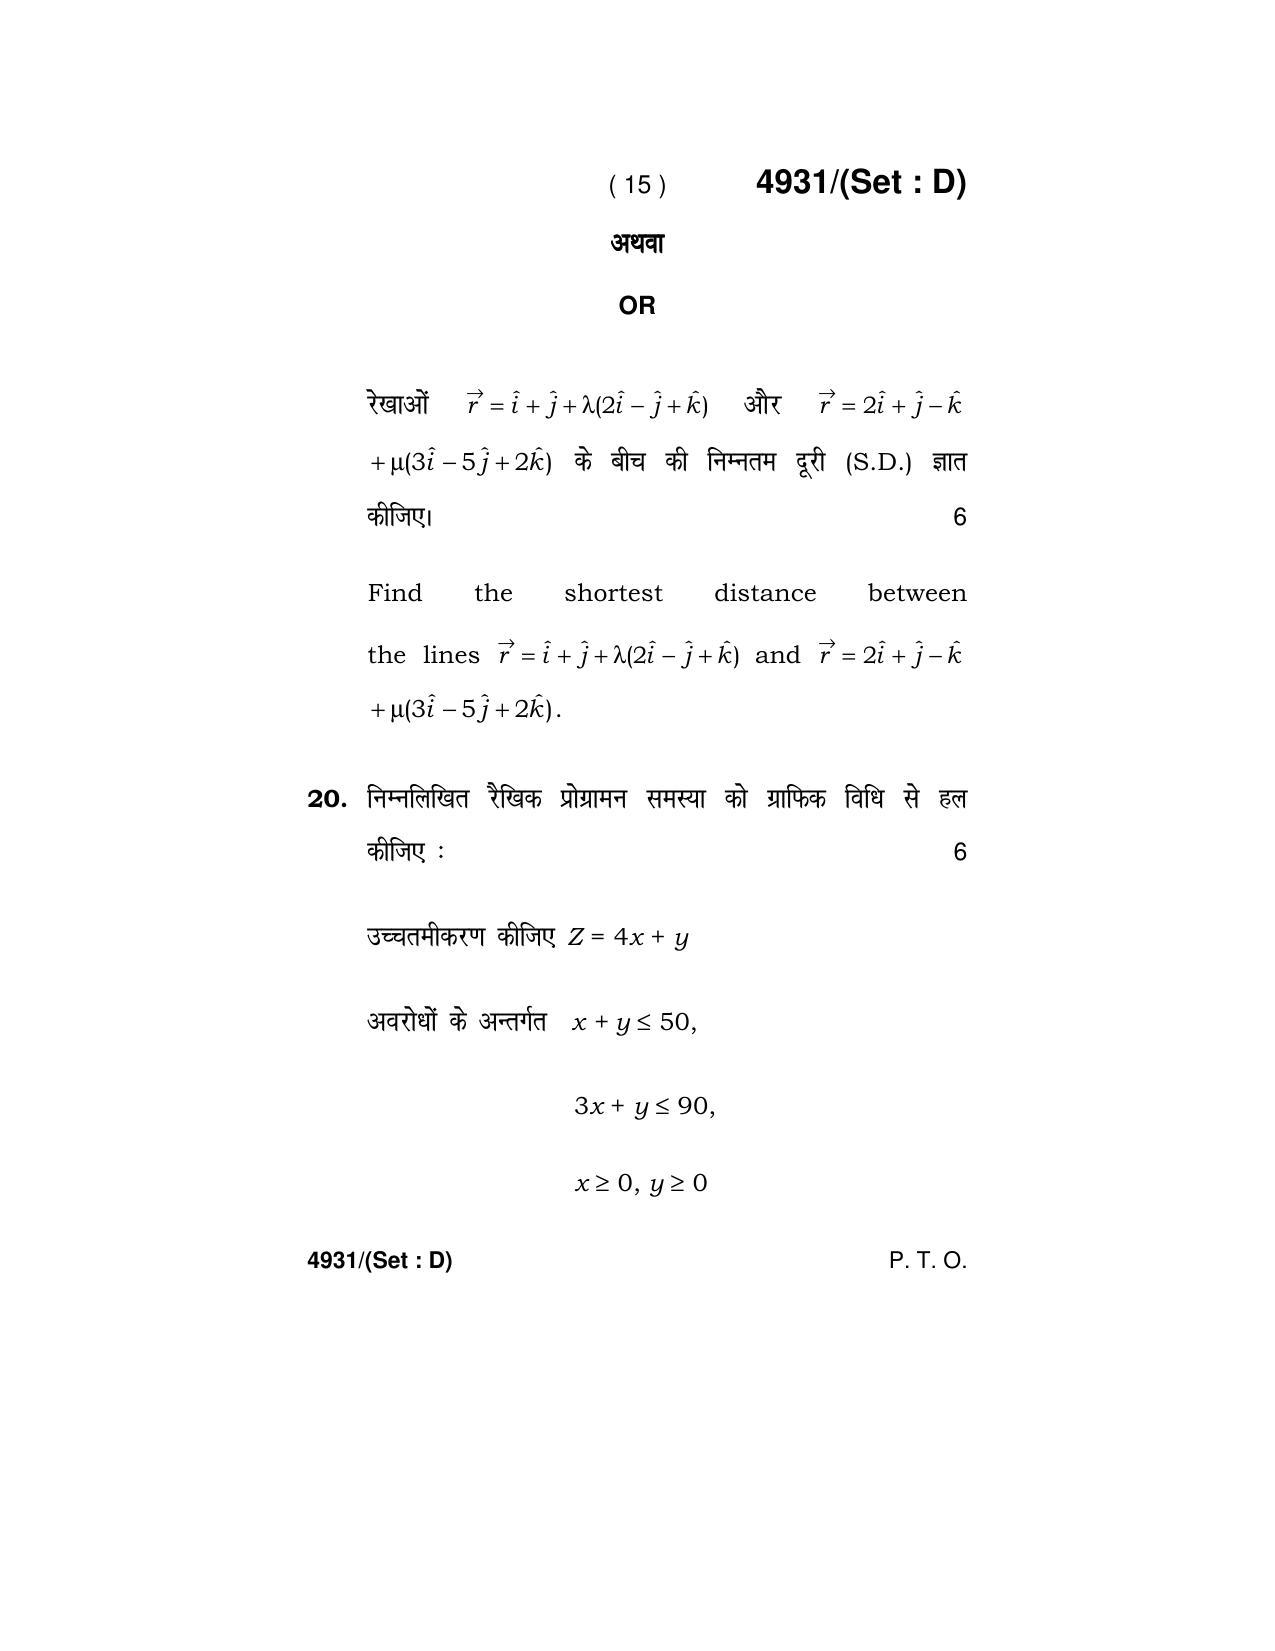 Haryana Board HBSE Class 12 Mathematics 2020 Question Paper - Page 63